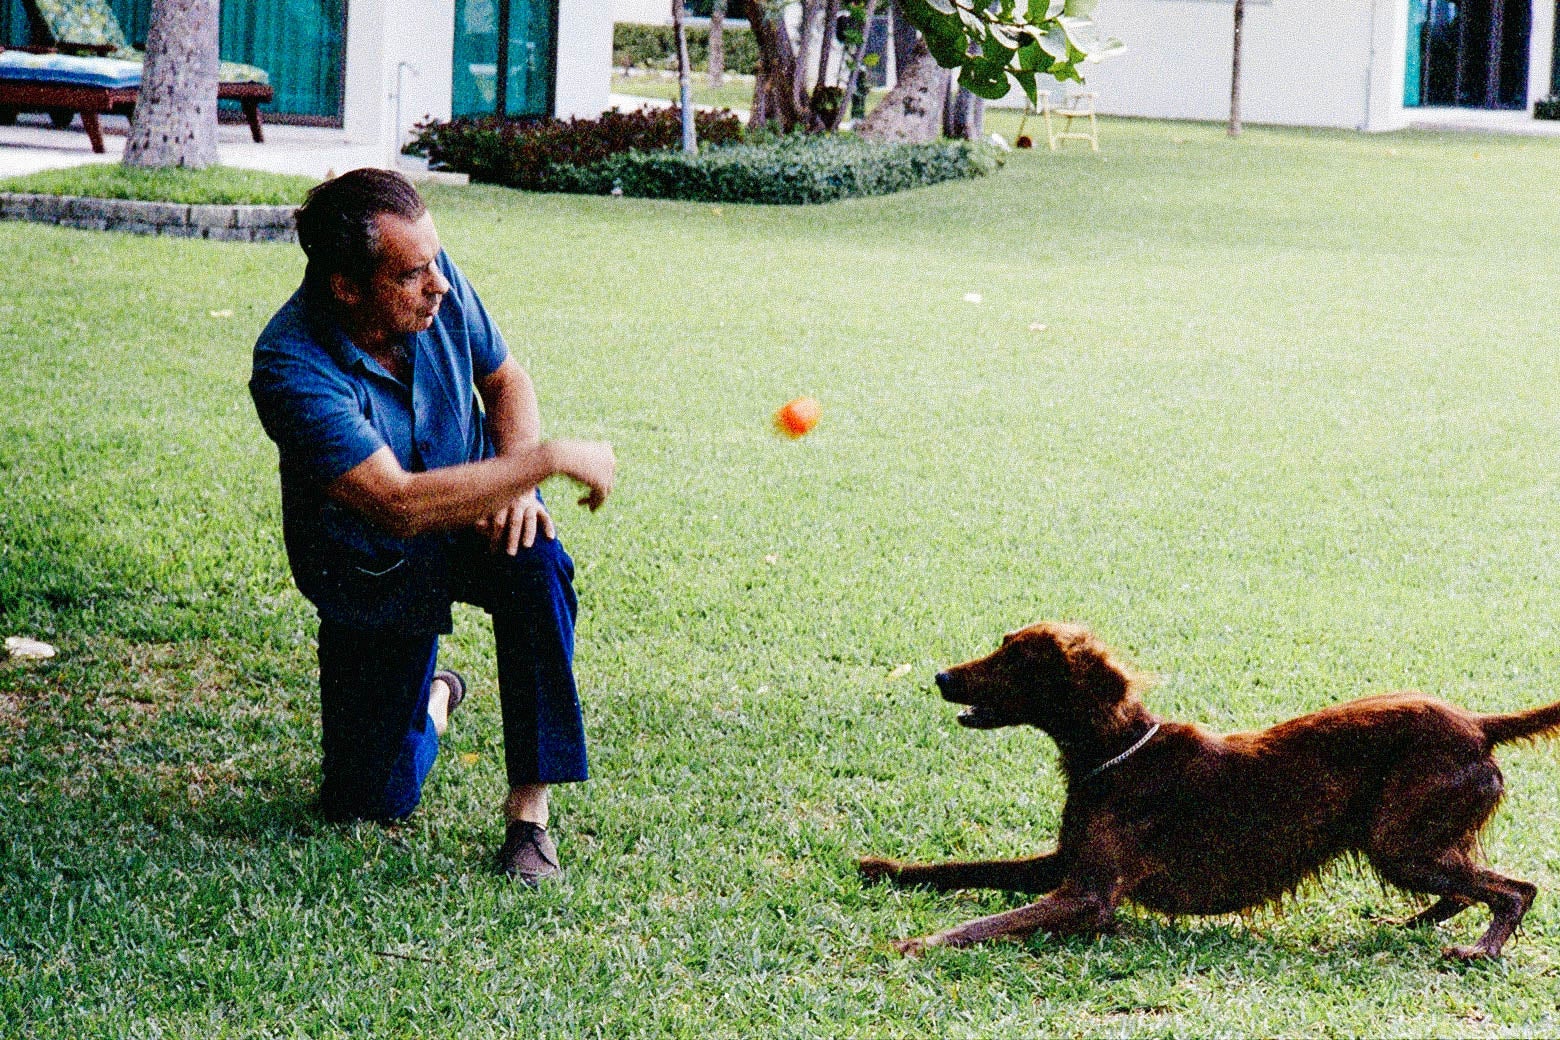 Richard Nixon, in 1970s leisurewear, tosses an orange ball to a dog on a green lawn in Florida.